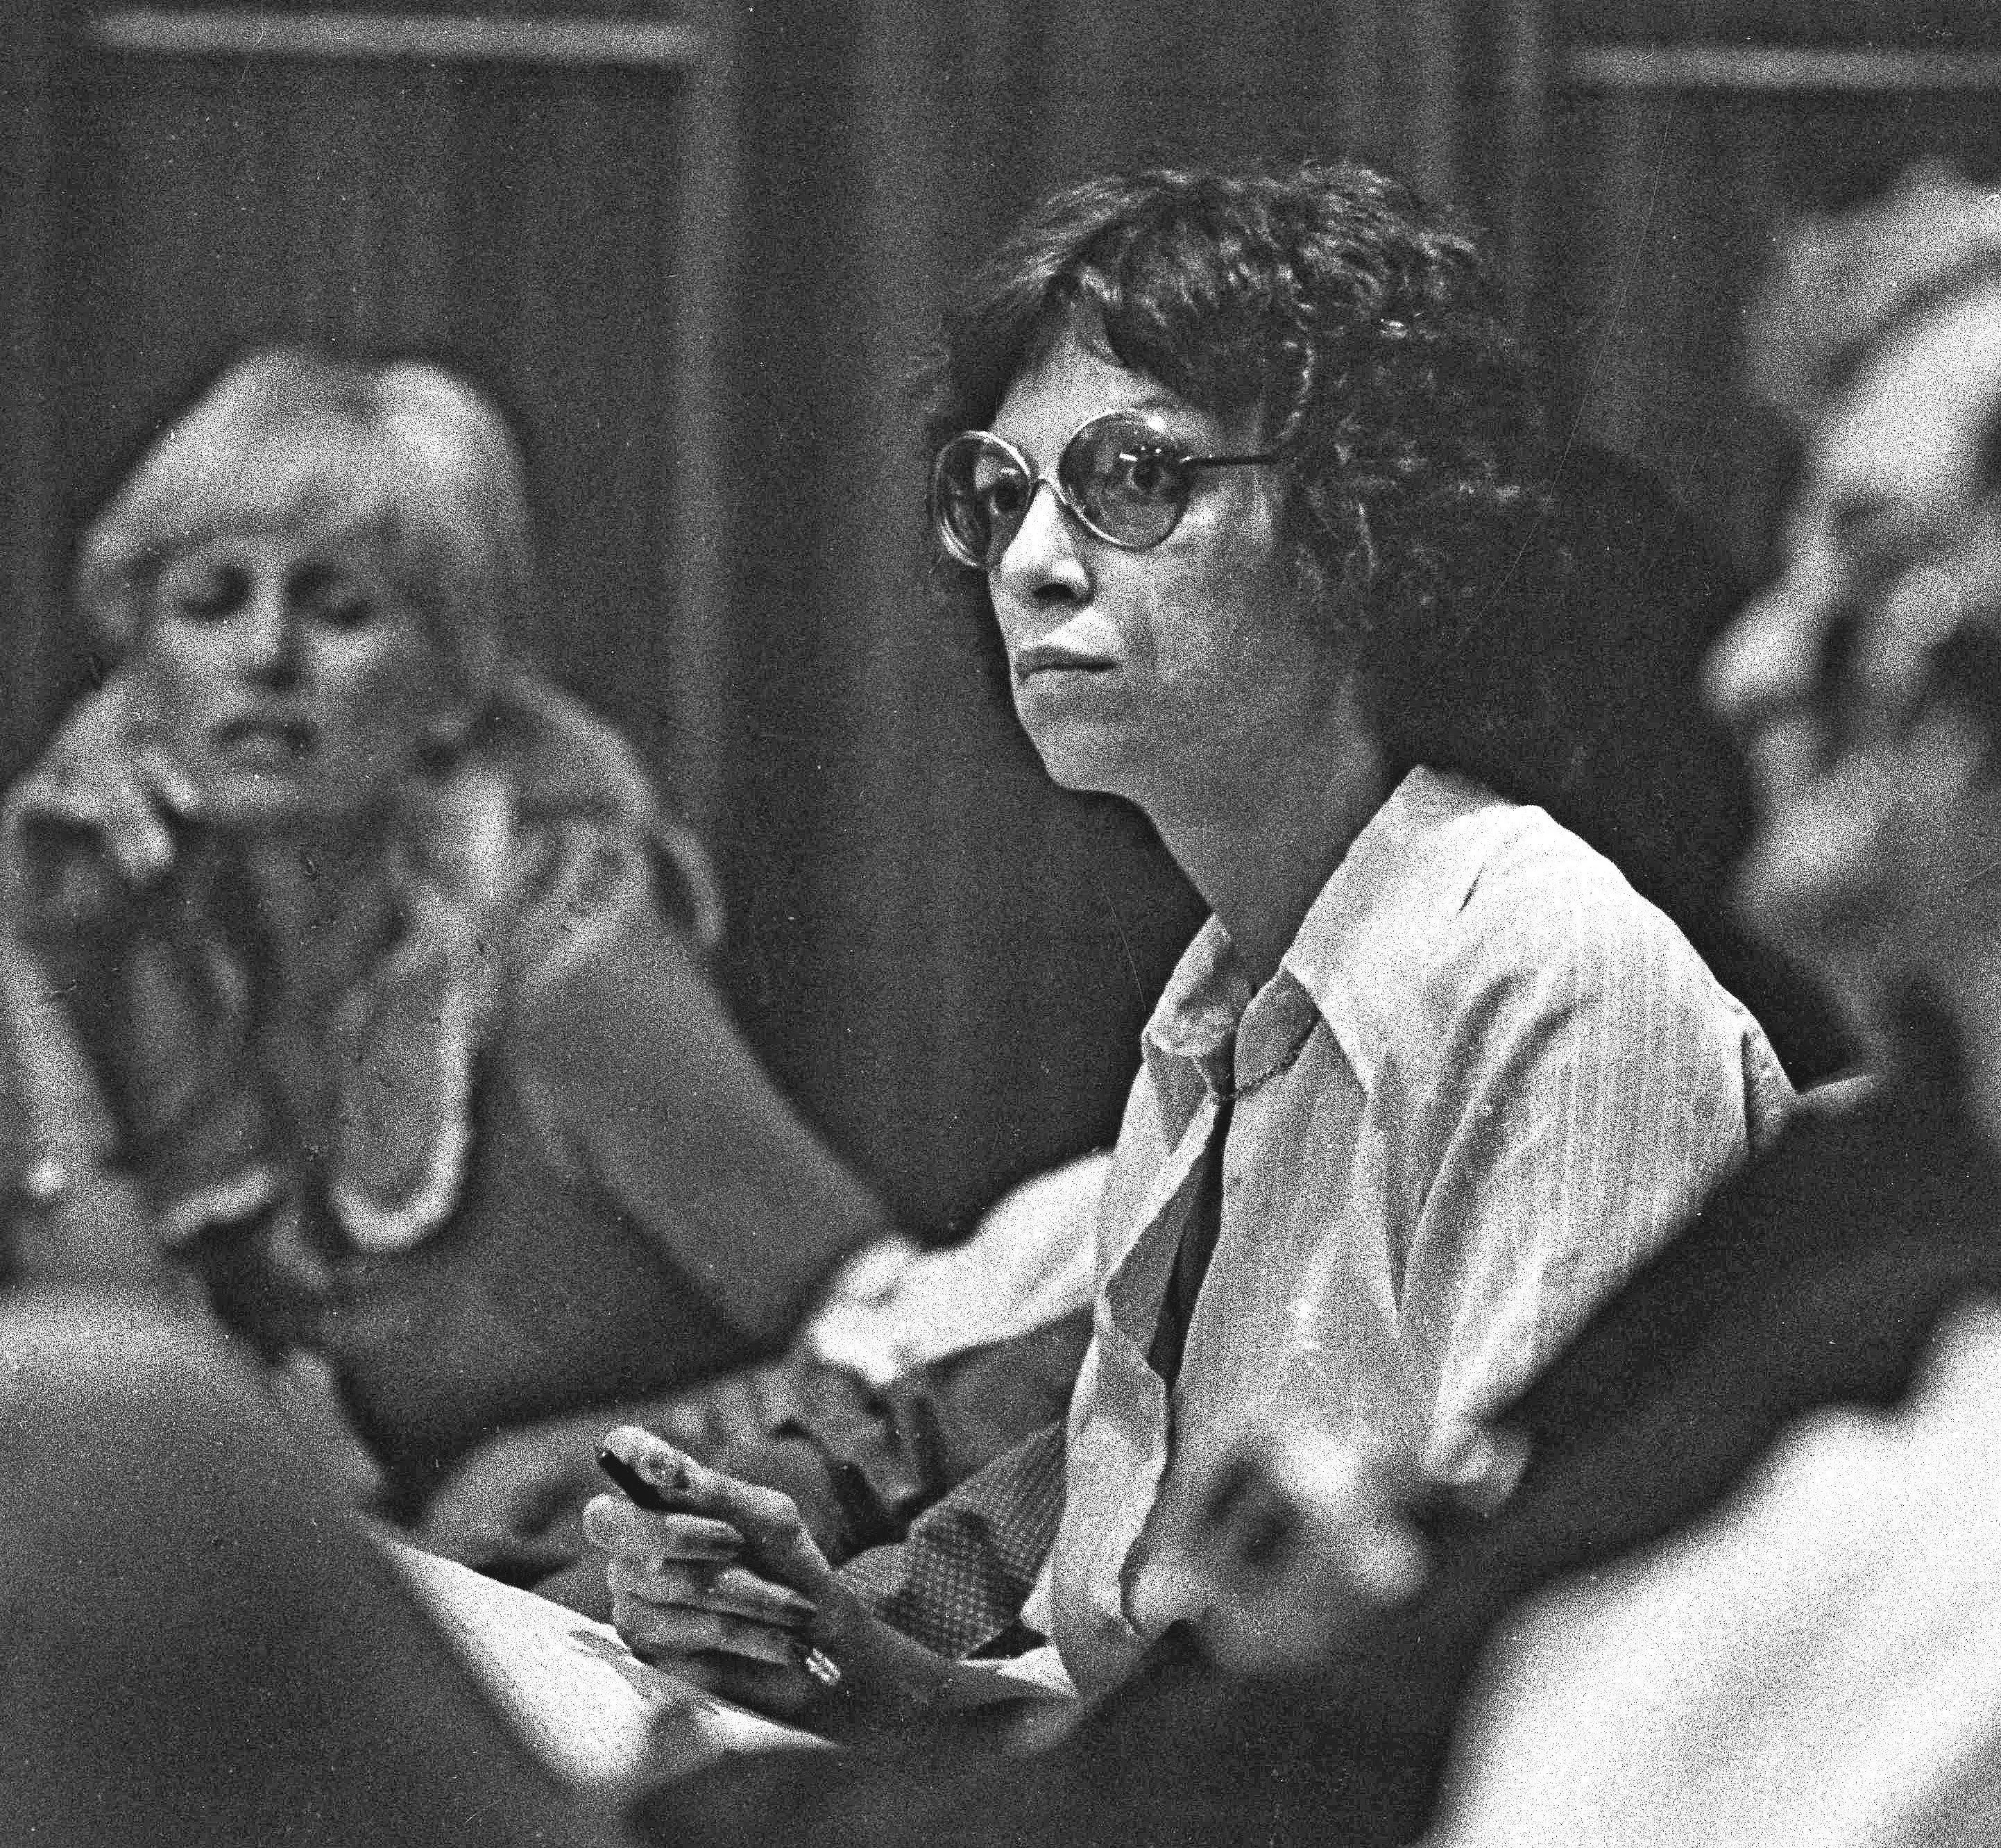 Carole Bundy in court supporting Ted Bundy through his trial (